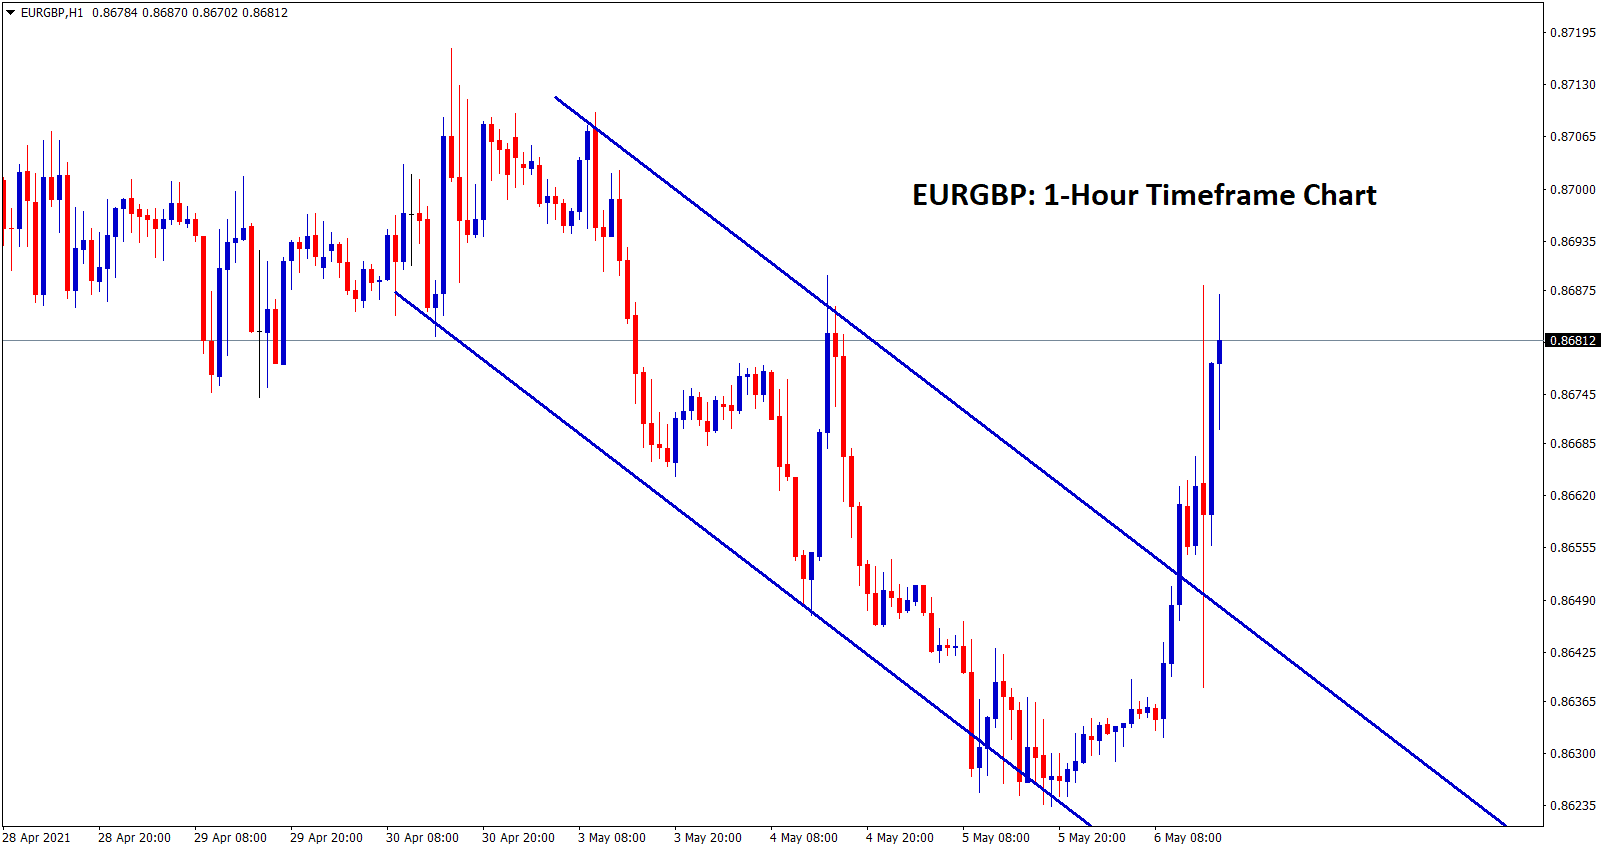 EURGBP broken the top level of the descending channel in H1